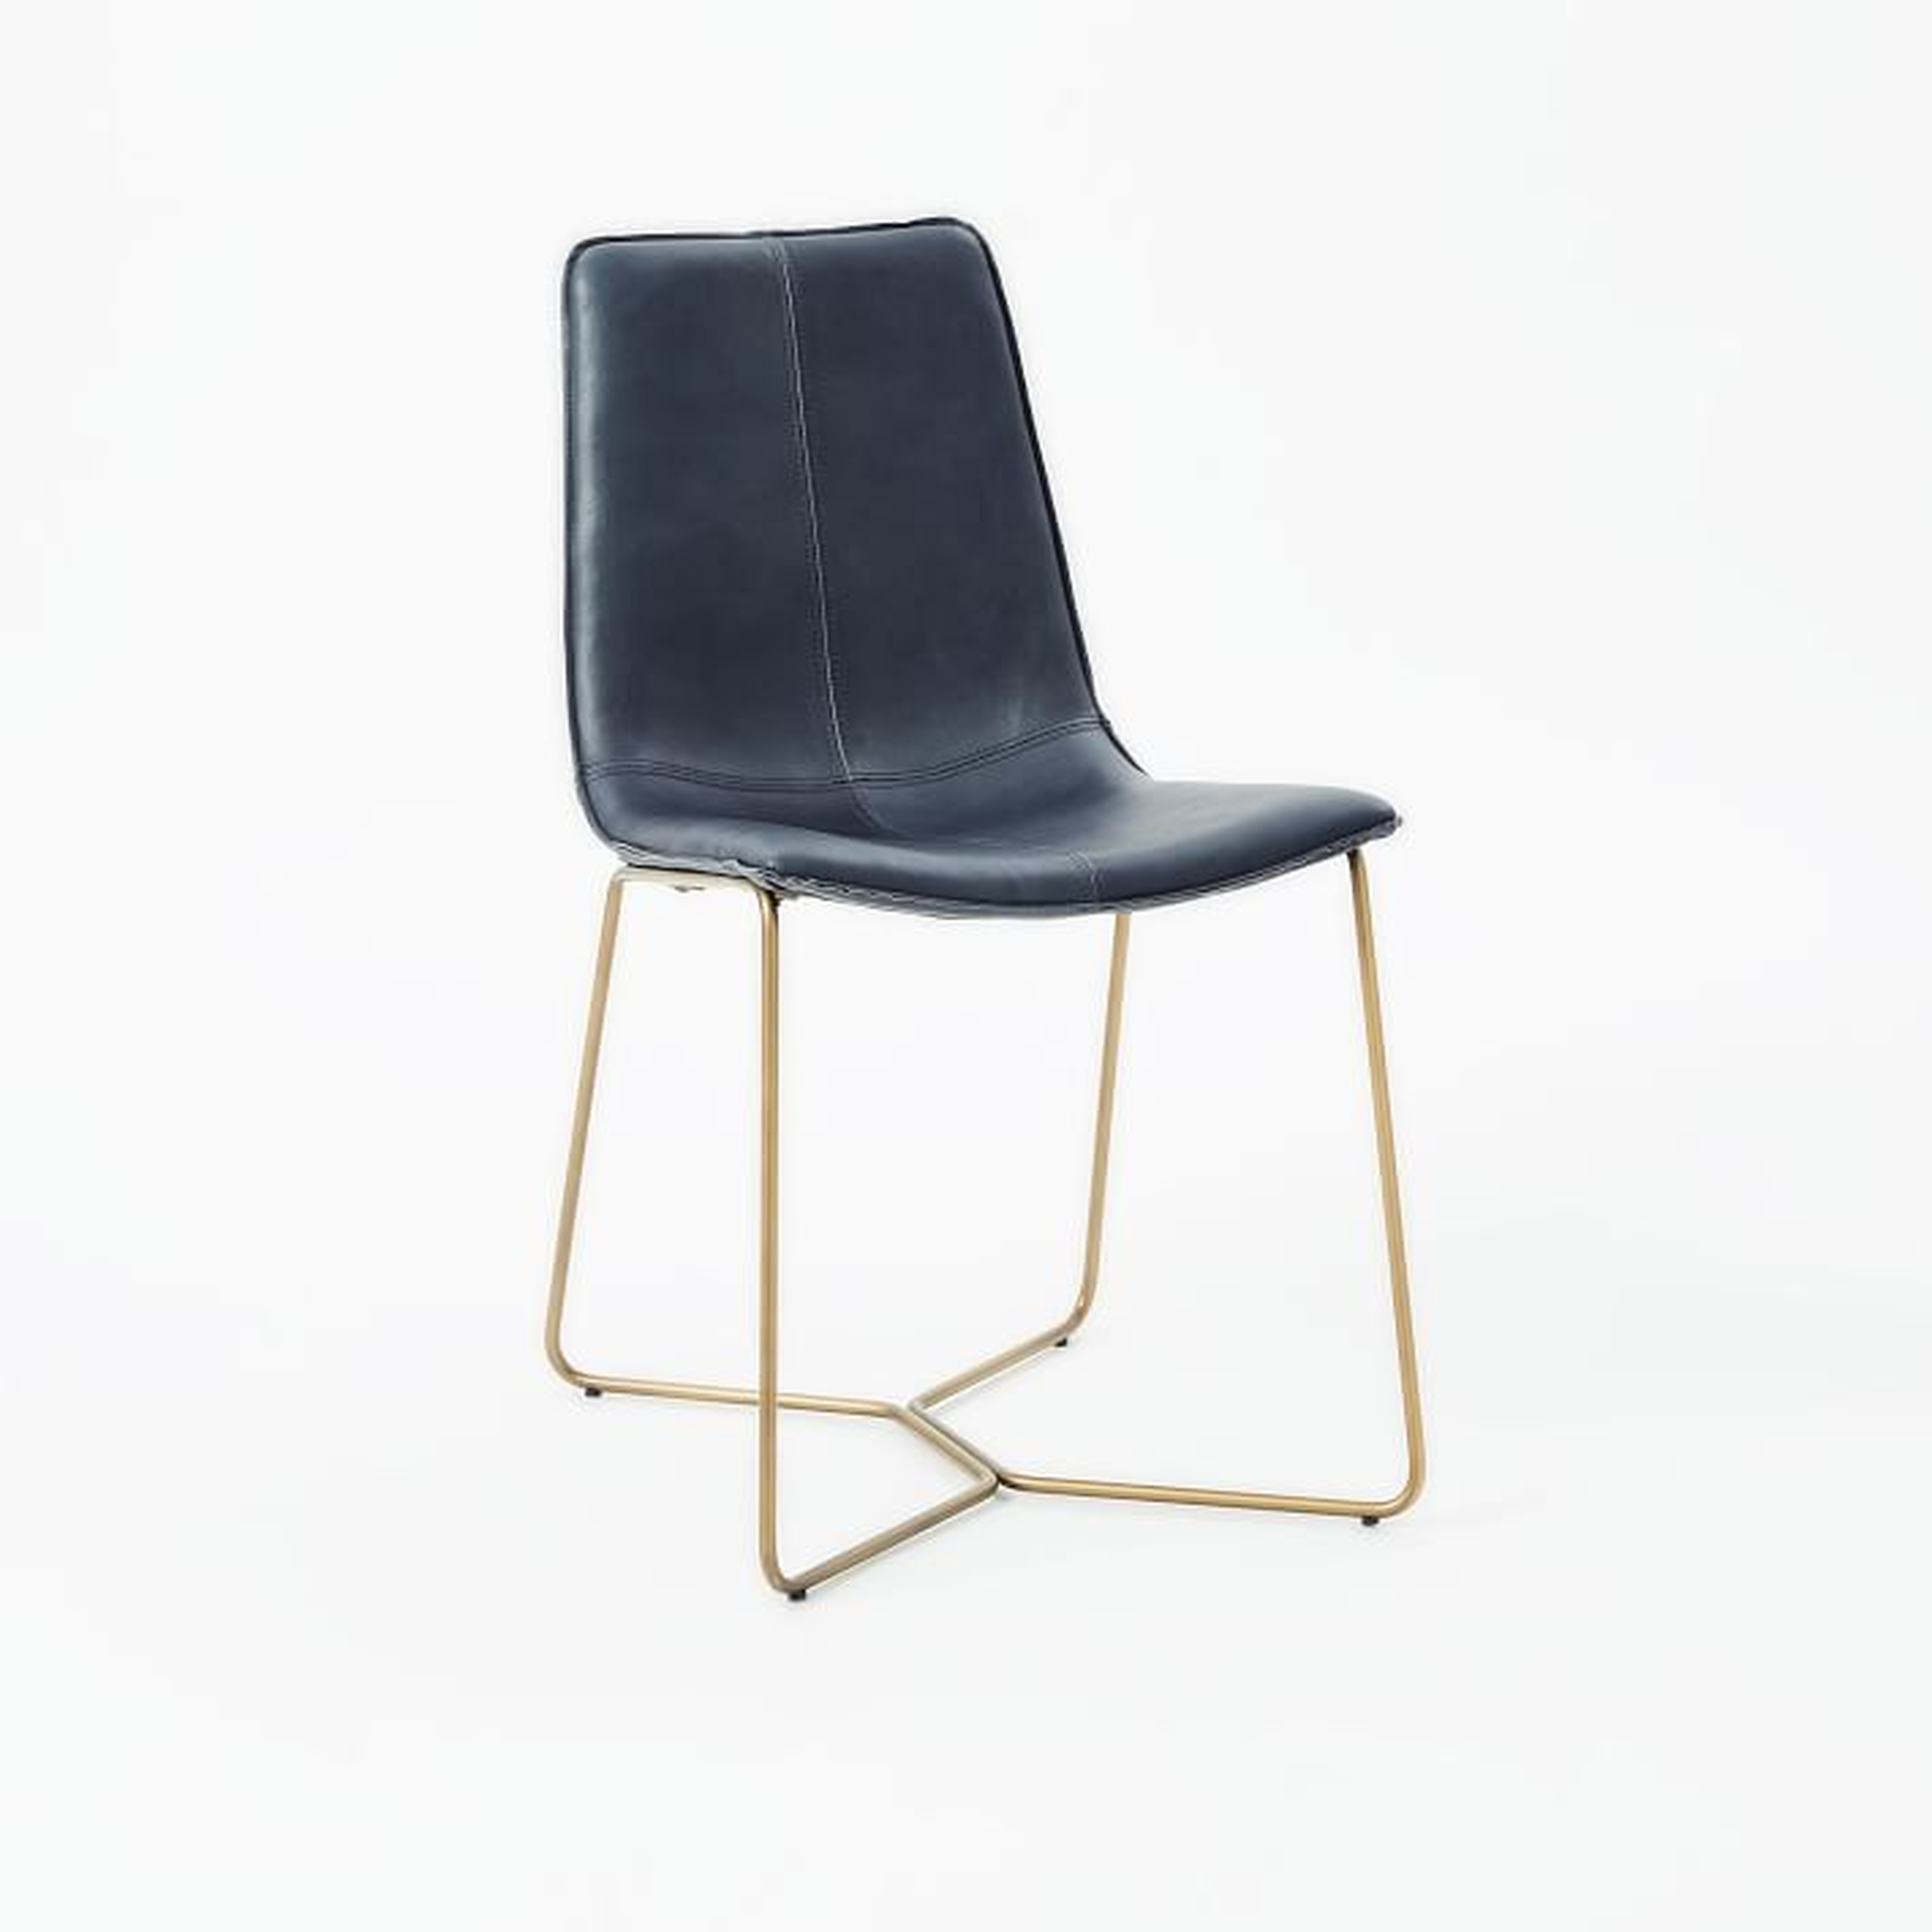 Slope Leather Lounge Chair, Agean, Antique Brass - West Elm